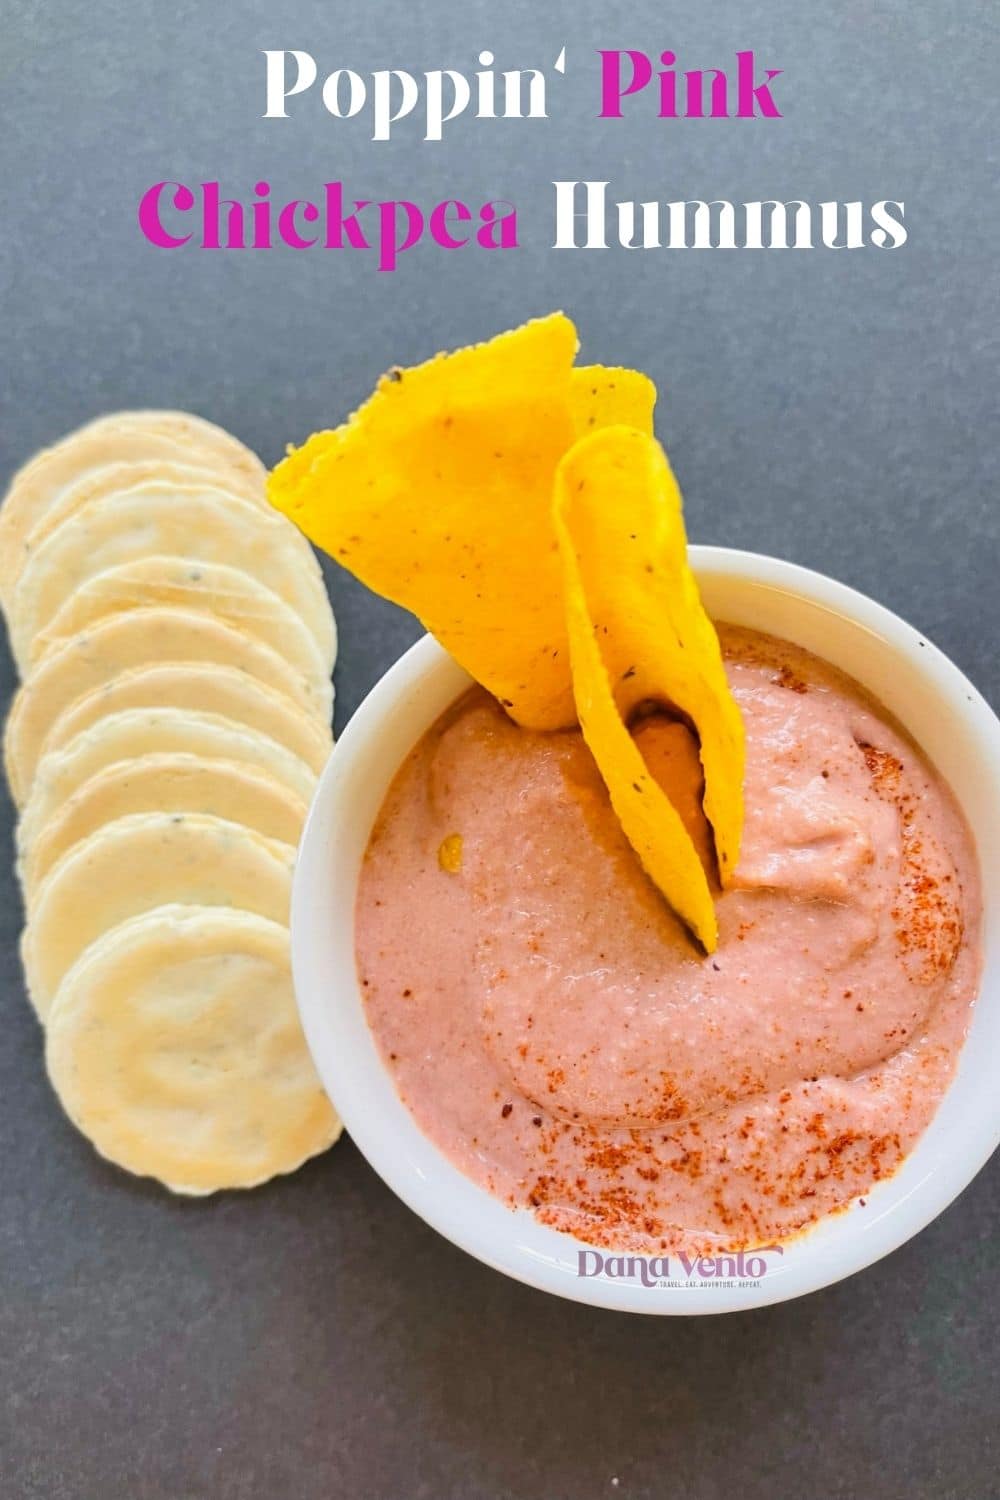 crackers and chips in hummus that is pink in a bowl